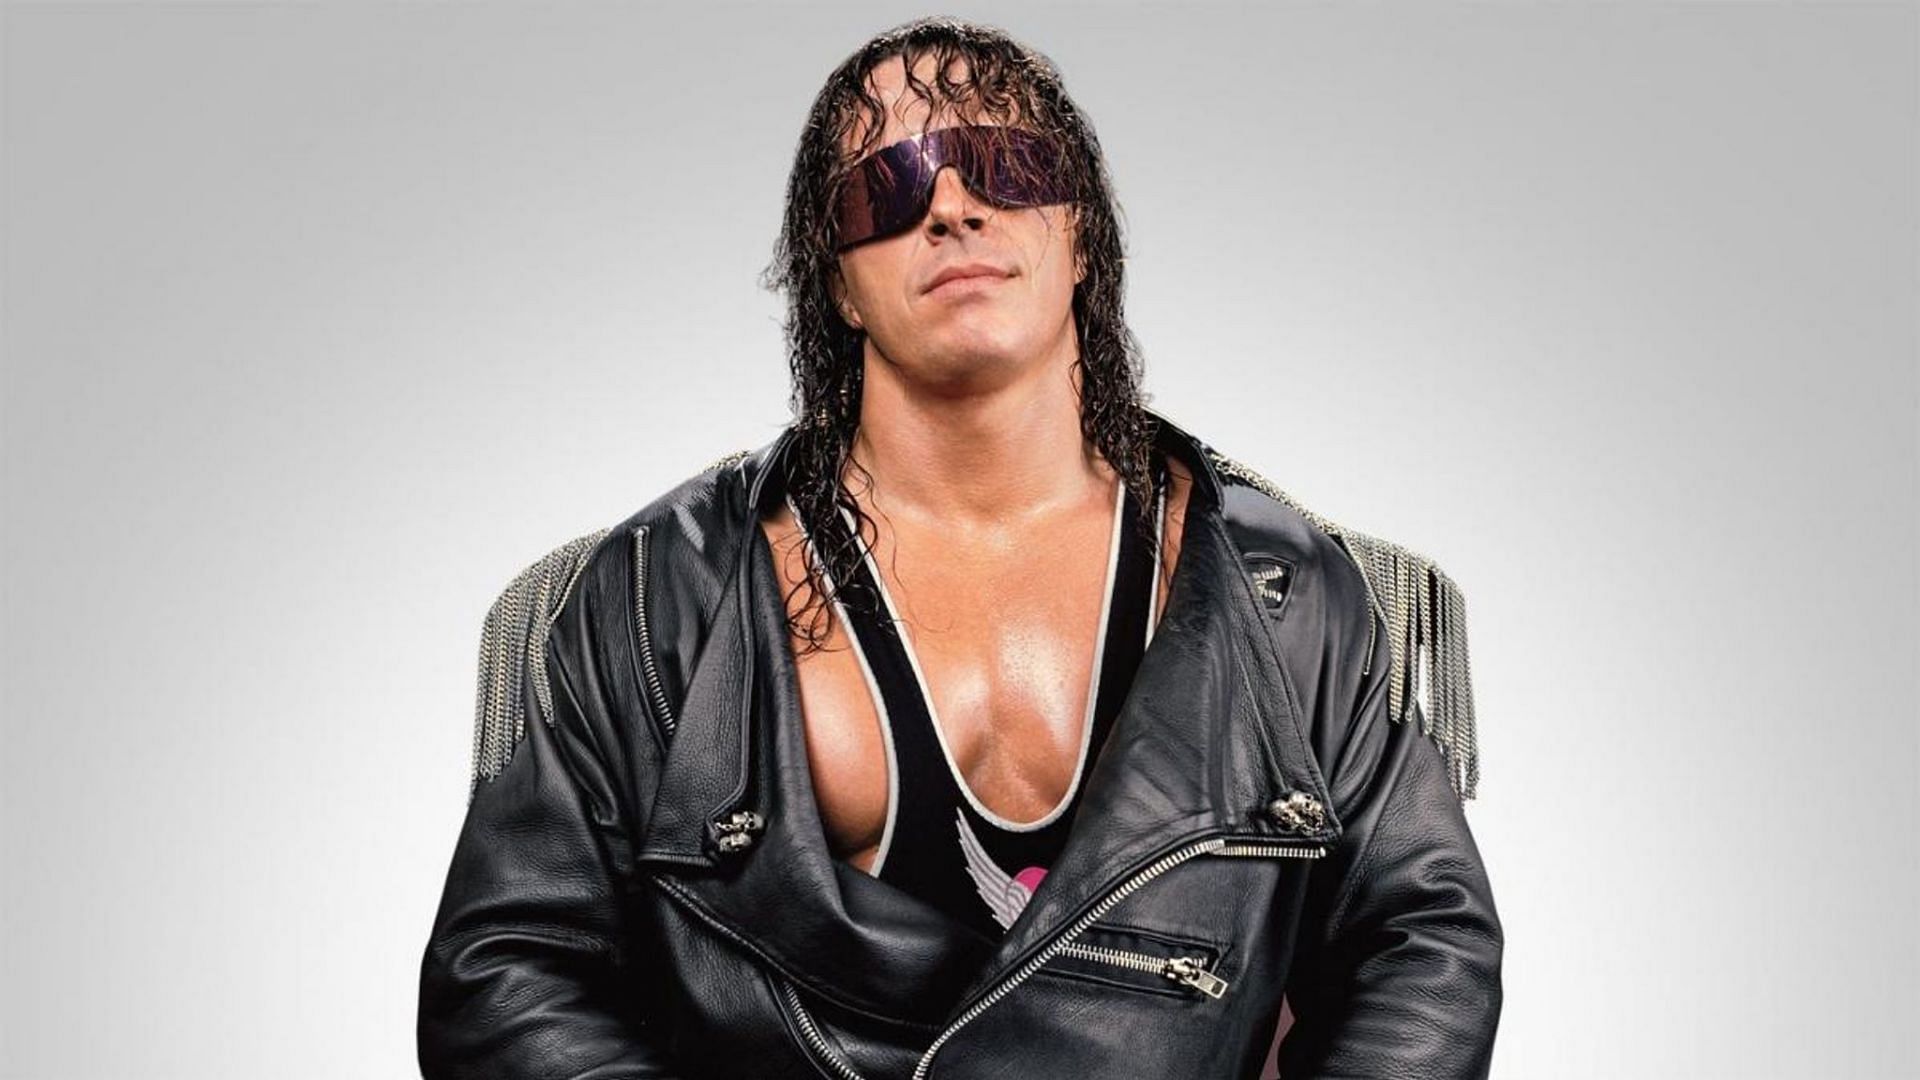 Bret Hart is a former WWE Champion